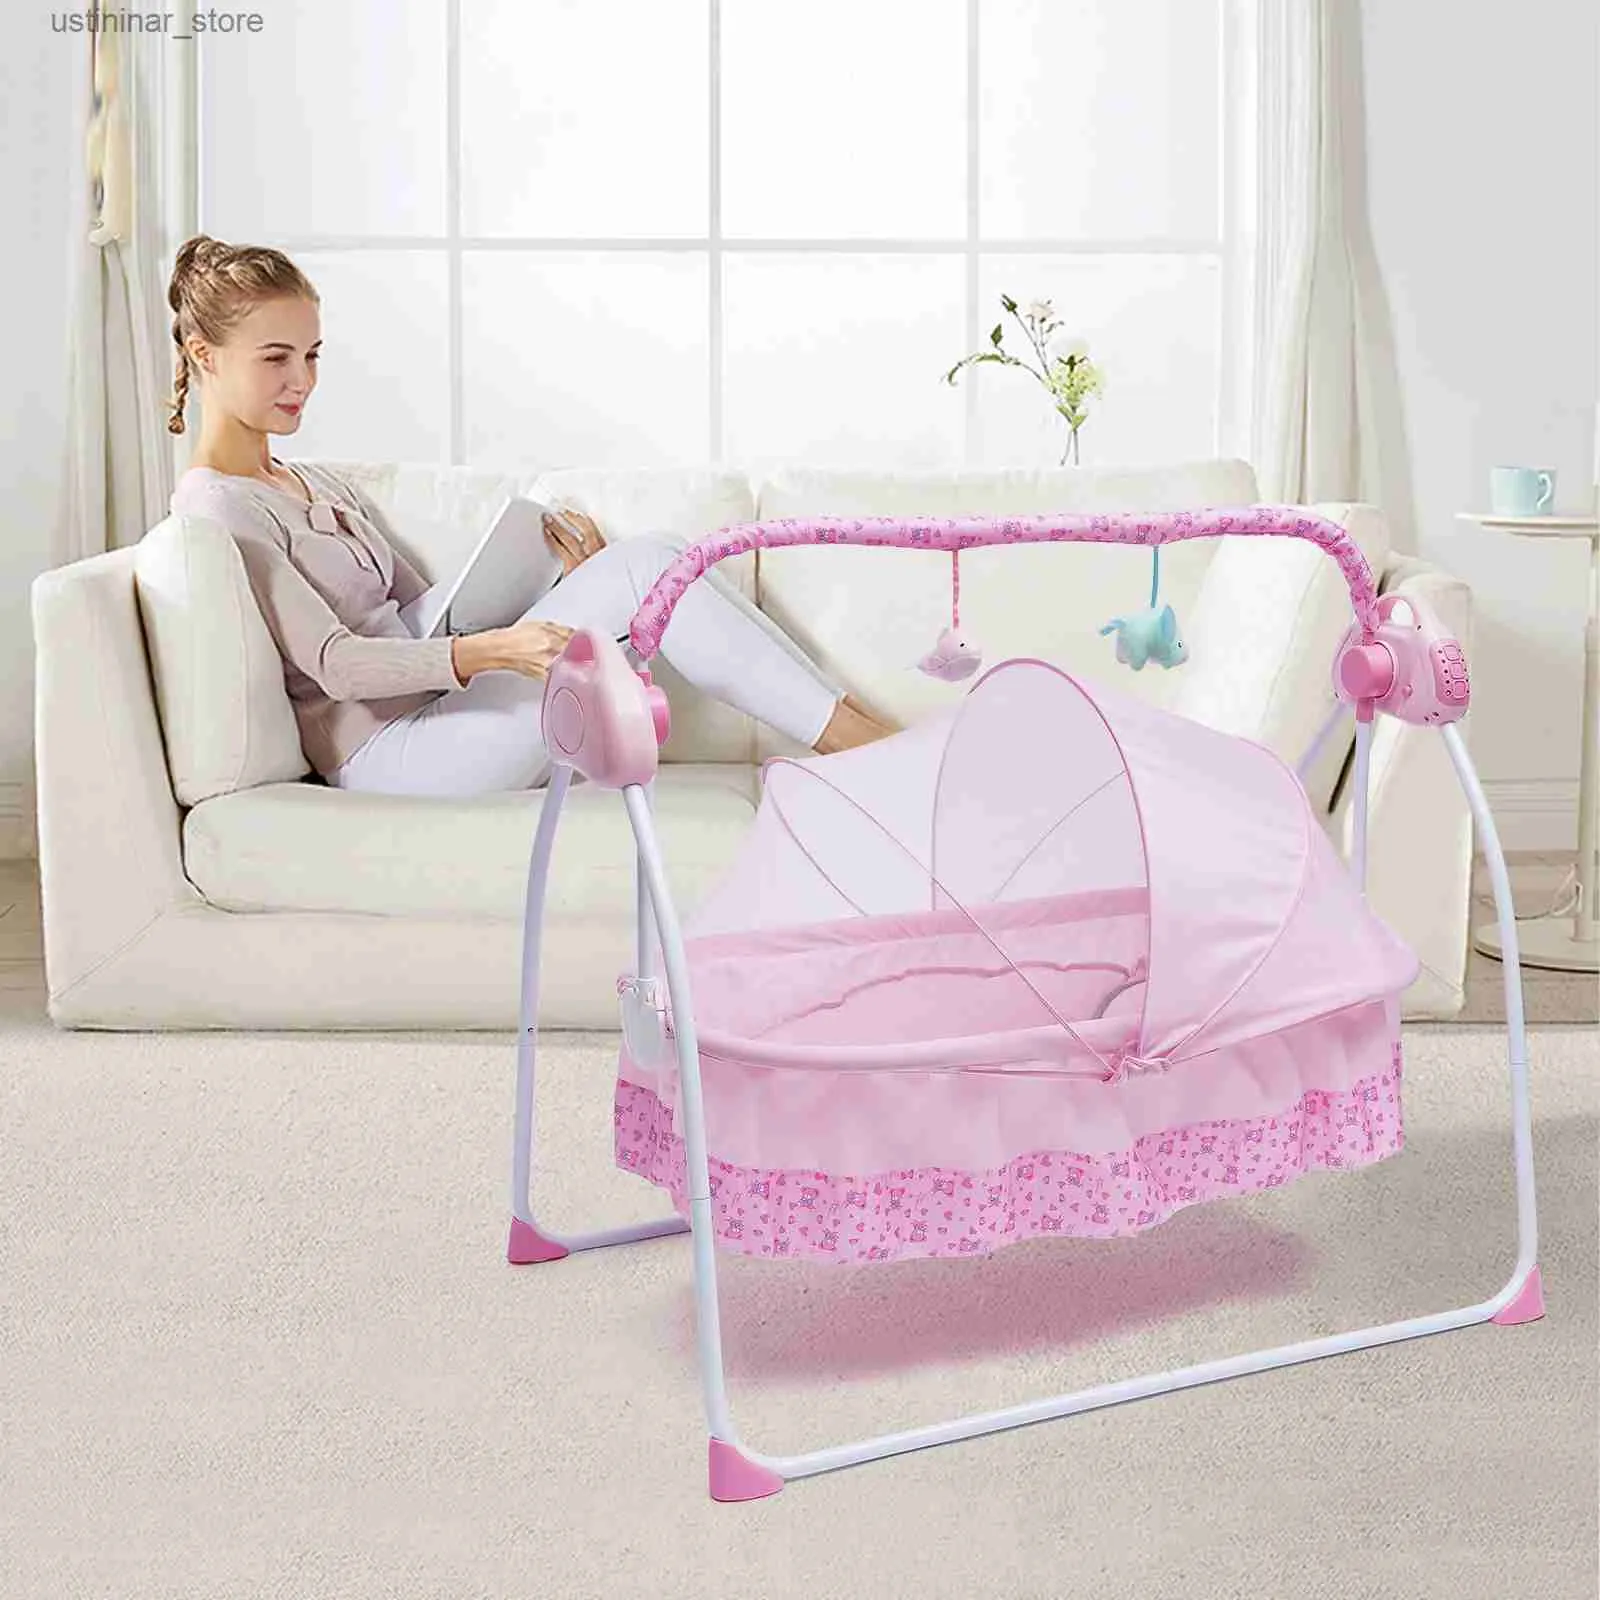 Baby Cribs 5 GRANDS AGRESS RÉGLABLE BABBAL CRADLE ELECTRICE AUTO-SWING ROCHING BASSINET TIMER BLUETOTH NUPSERY MUBLICE + MAT L416